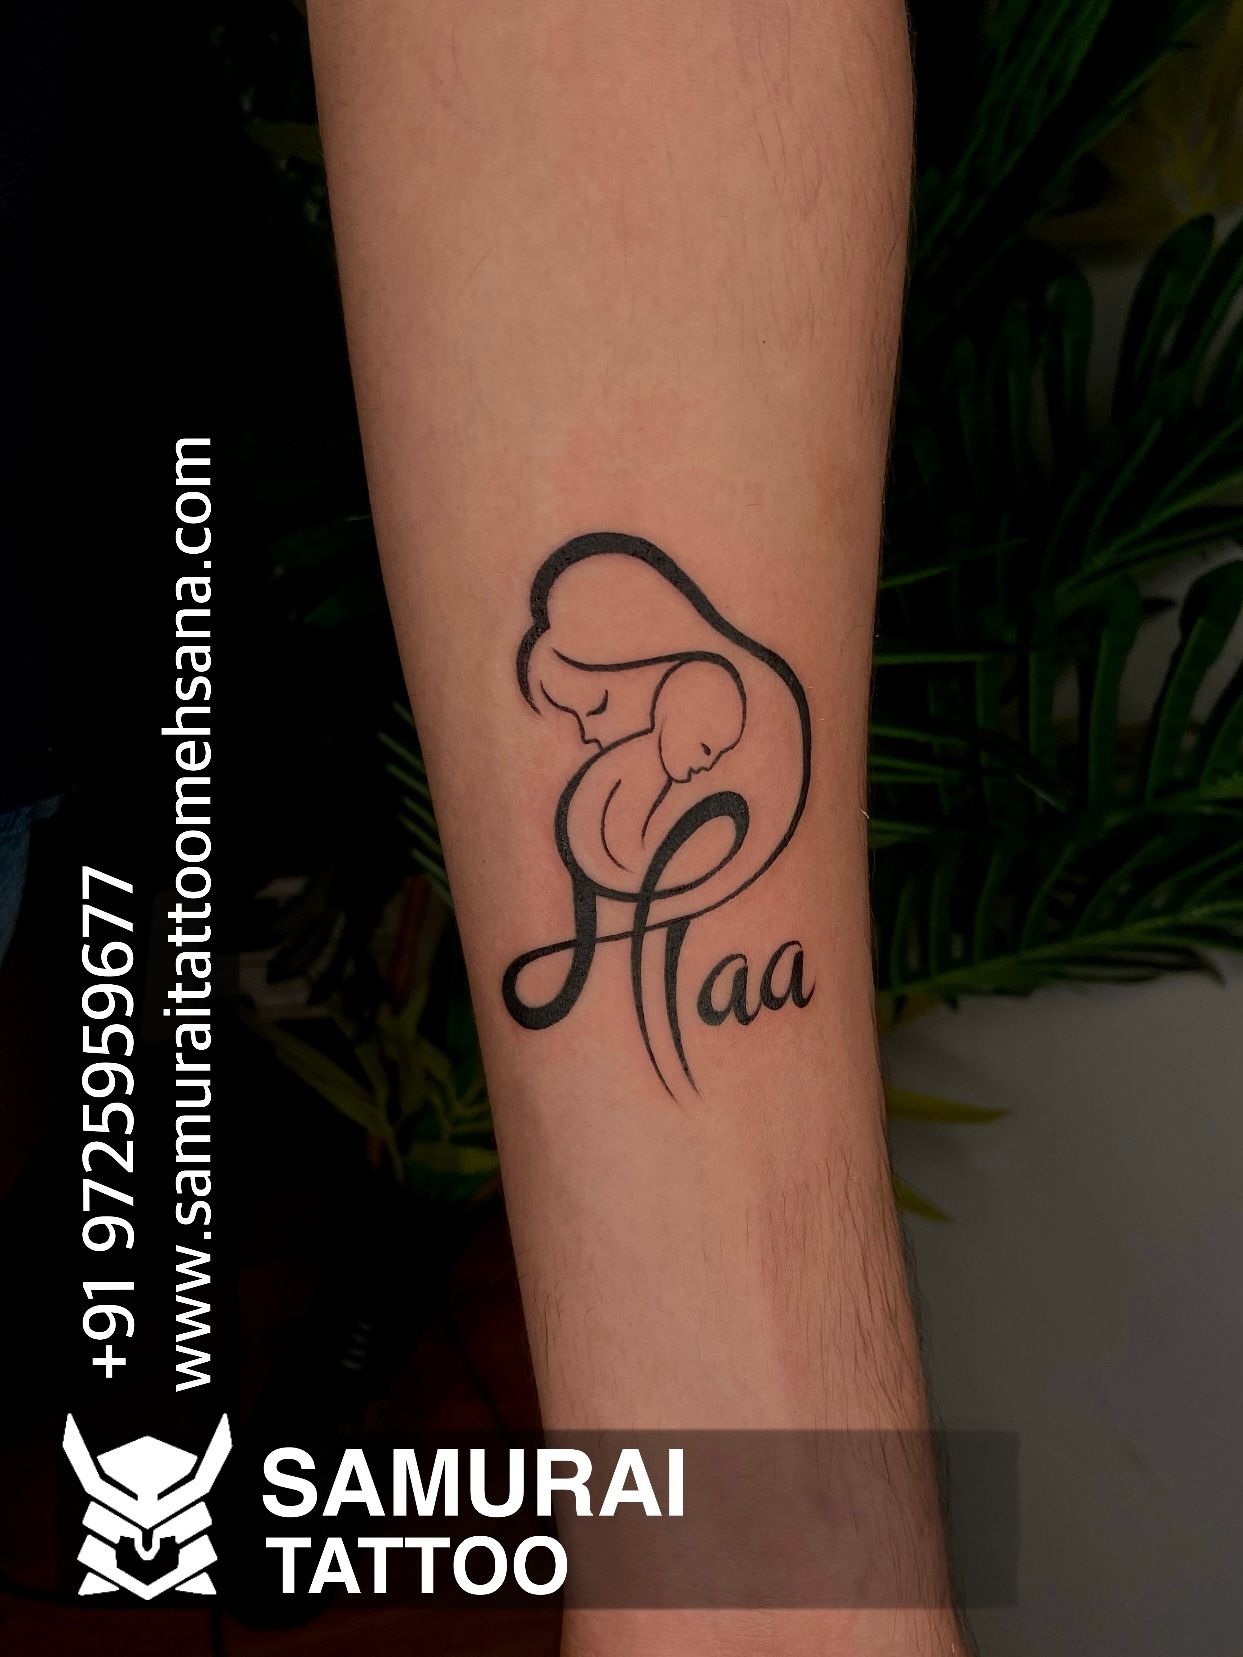 Maa Paa Tattoo Designs & Ideas for Men and Women